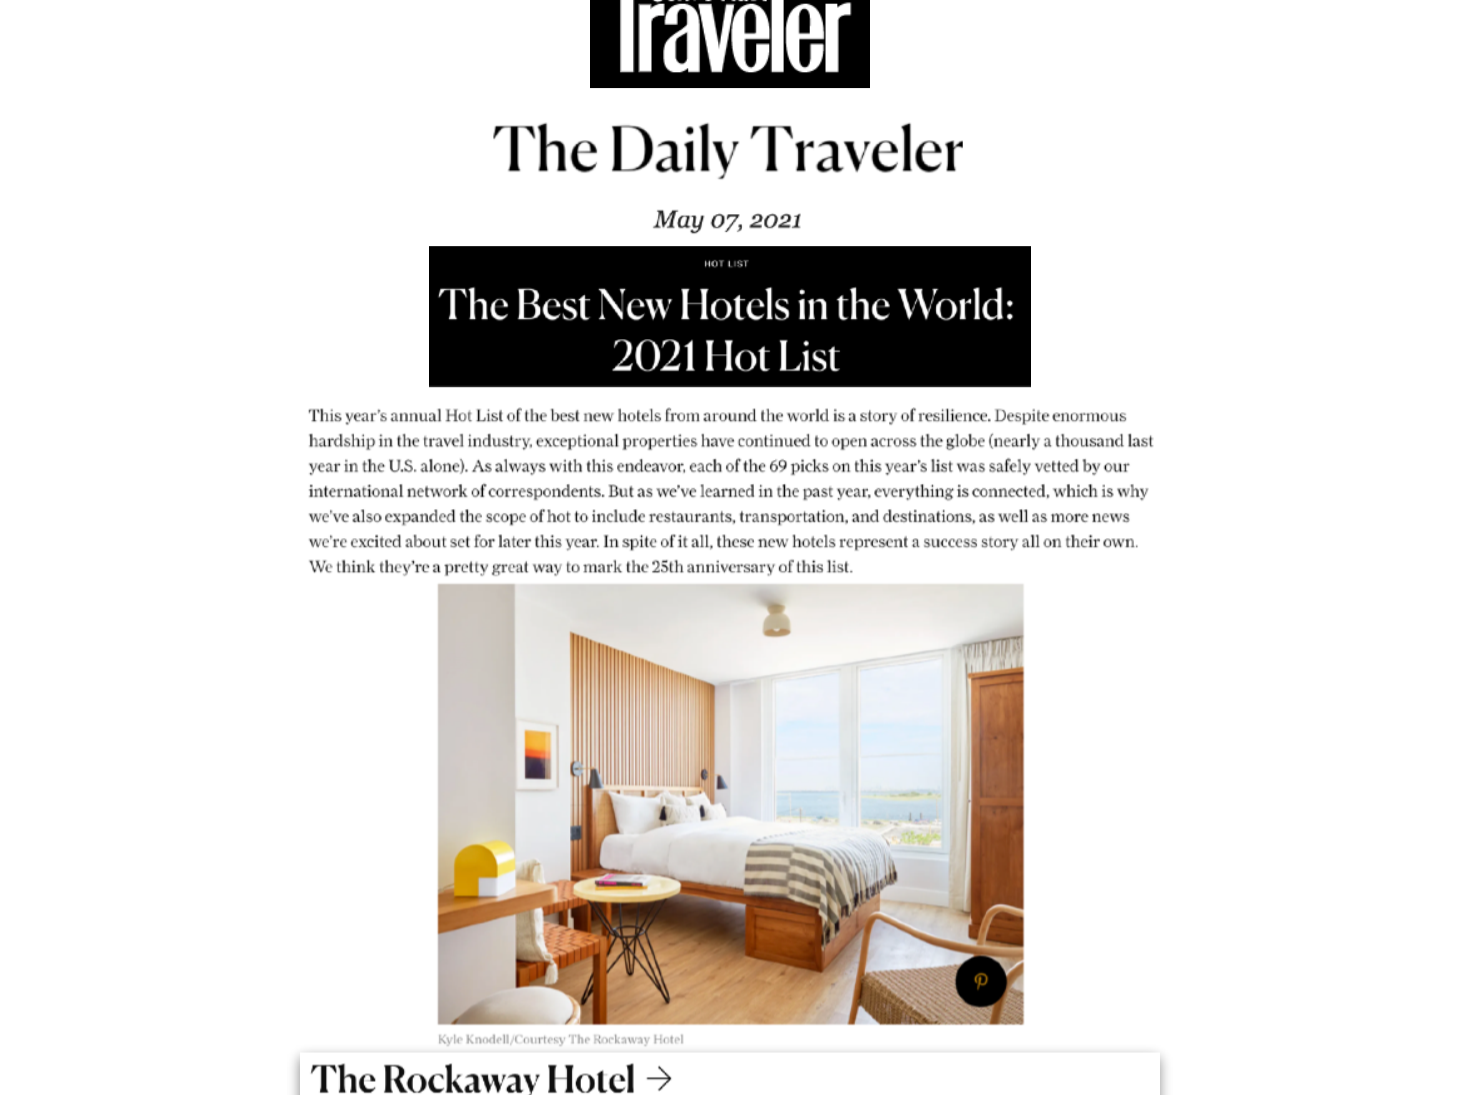 Condé Nast Traveler - The Best New Hotels in the World: 2021 Hot